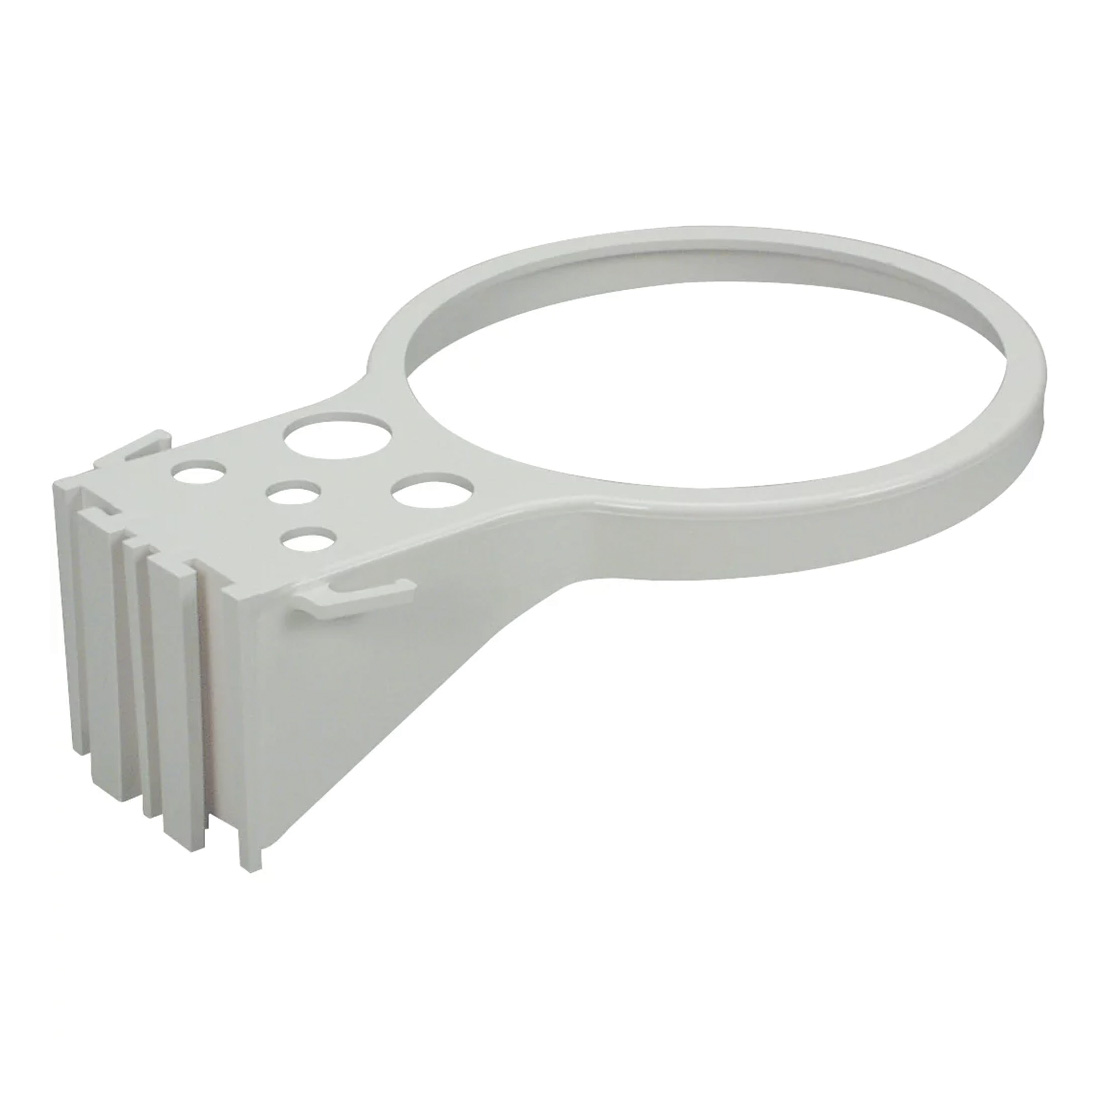 Plastic Ring for Wall Plate 1200cc, 2000cc, & 3000cc Canisters